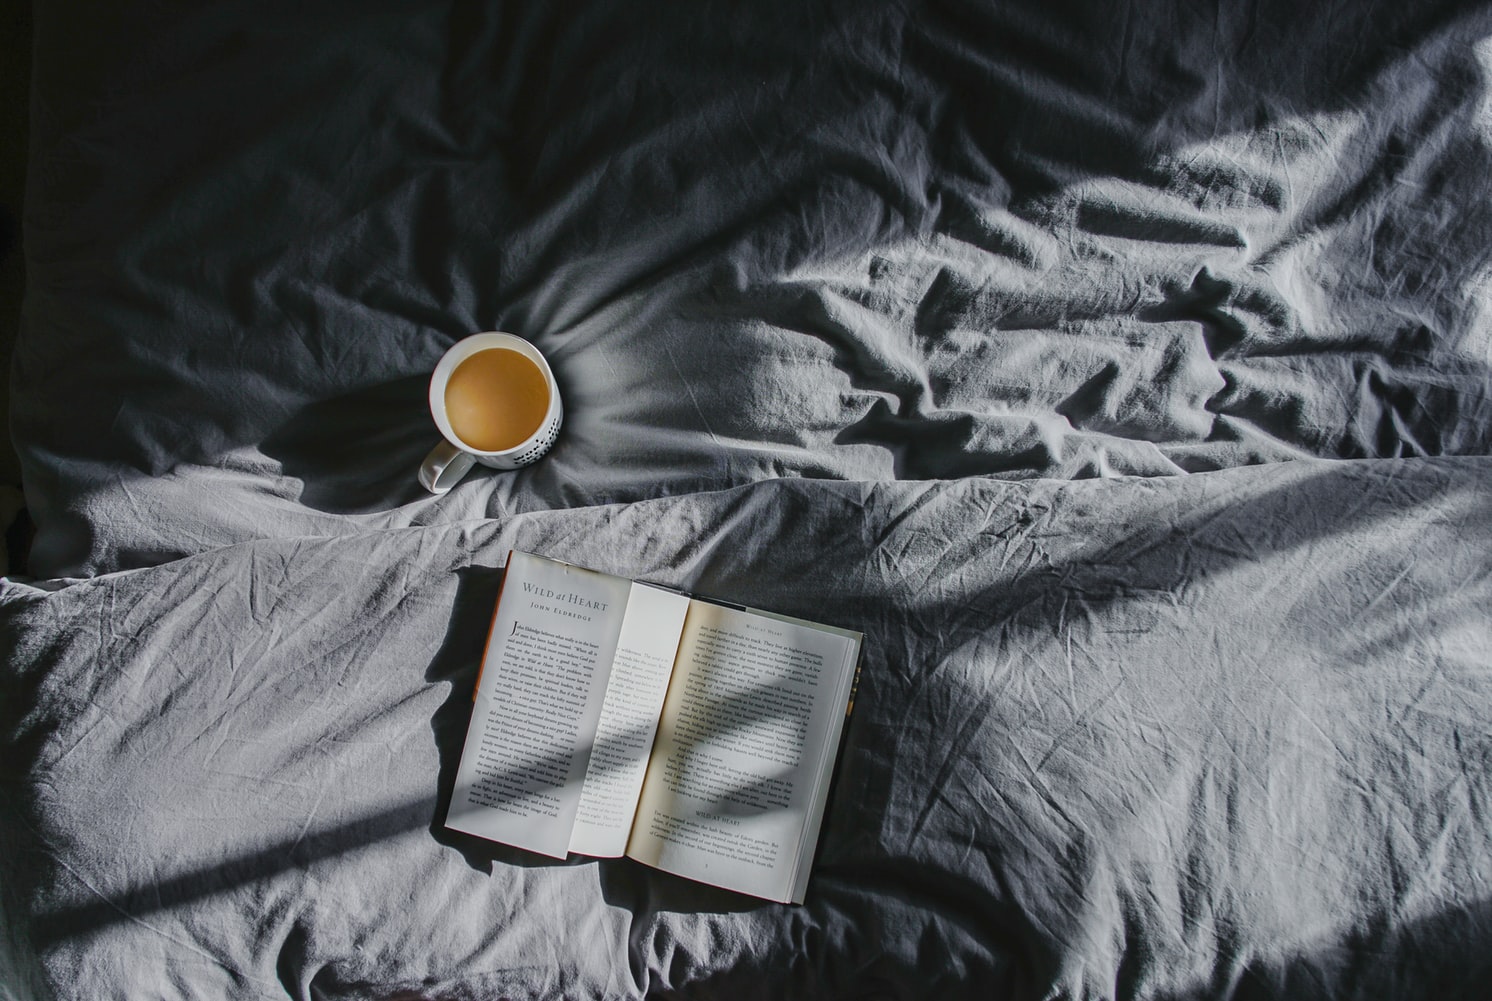 Coffee and a book on a gray bedding